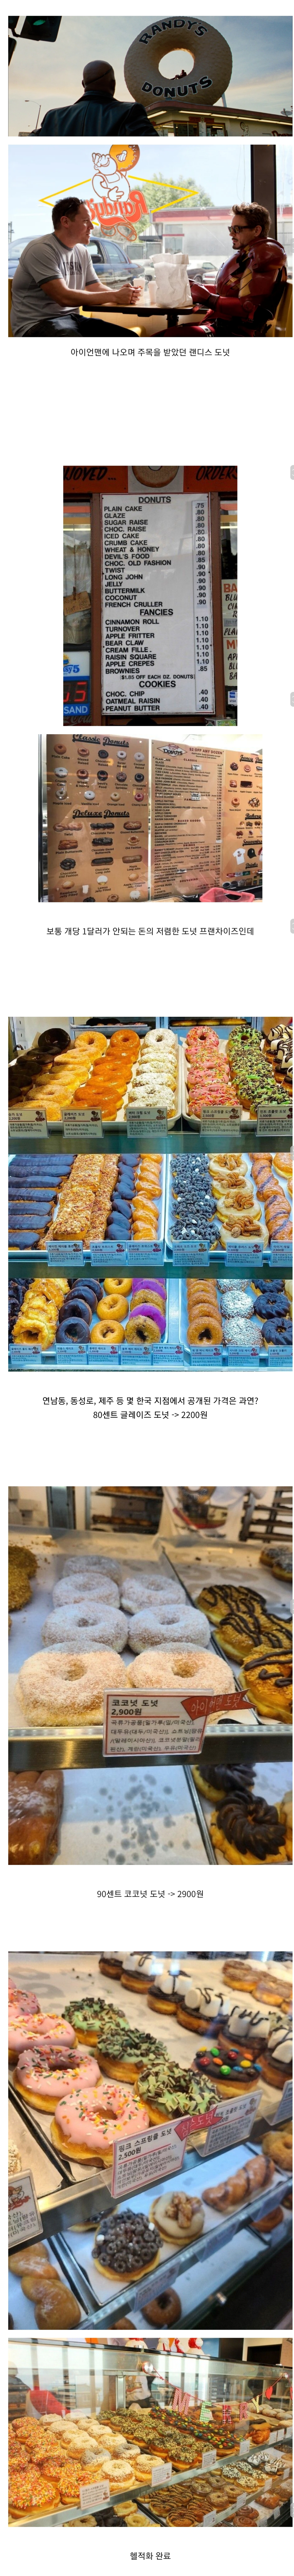 Landis Donut, famous for Iron Man Donuts landed in Korea